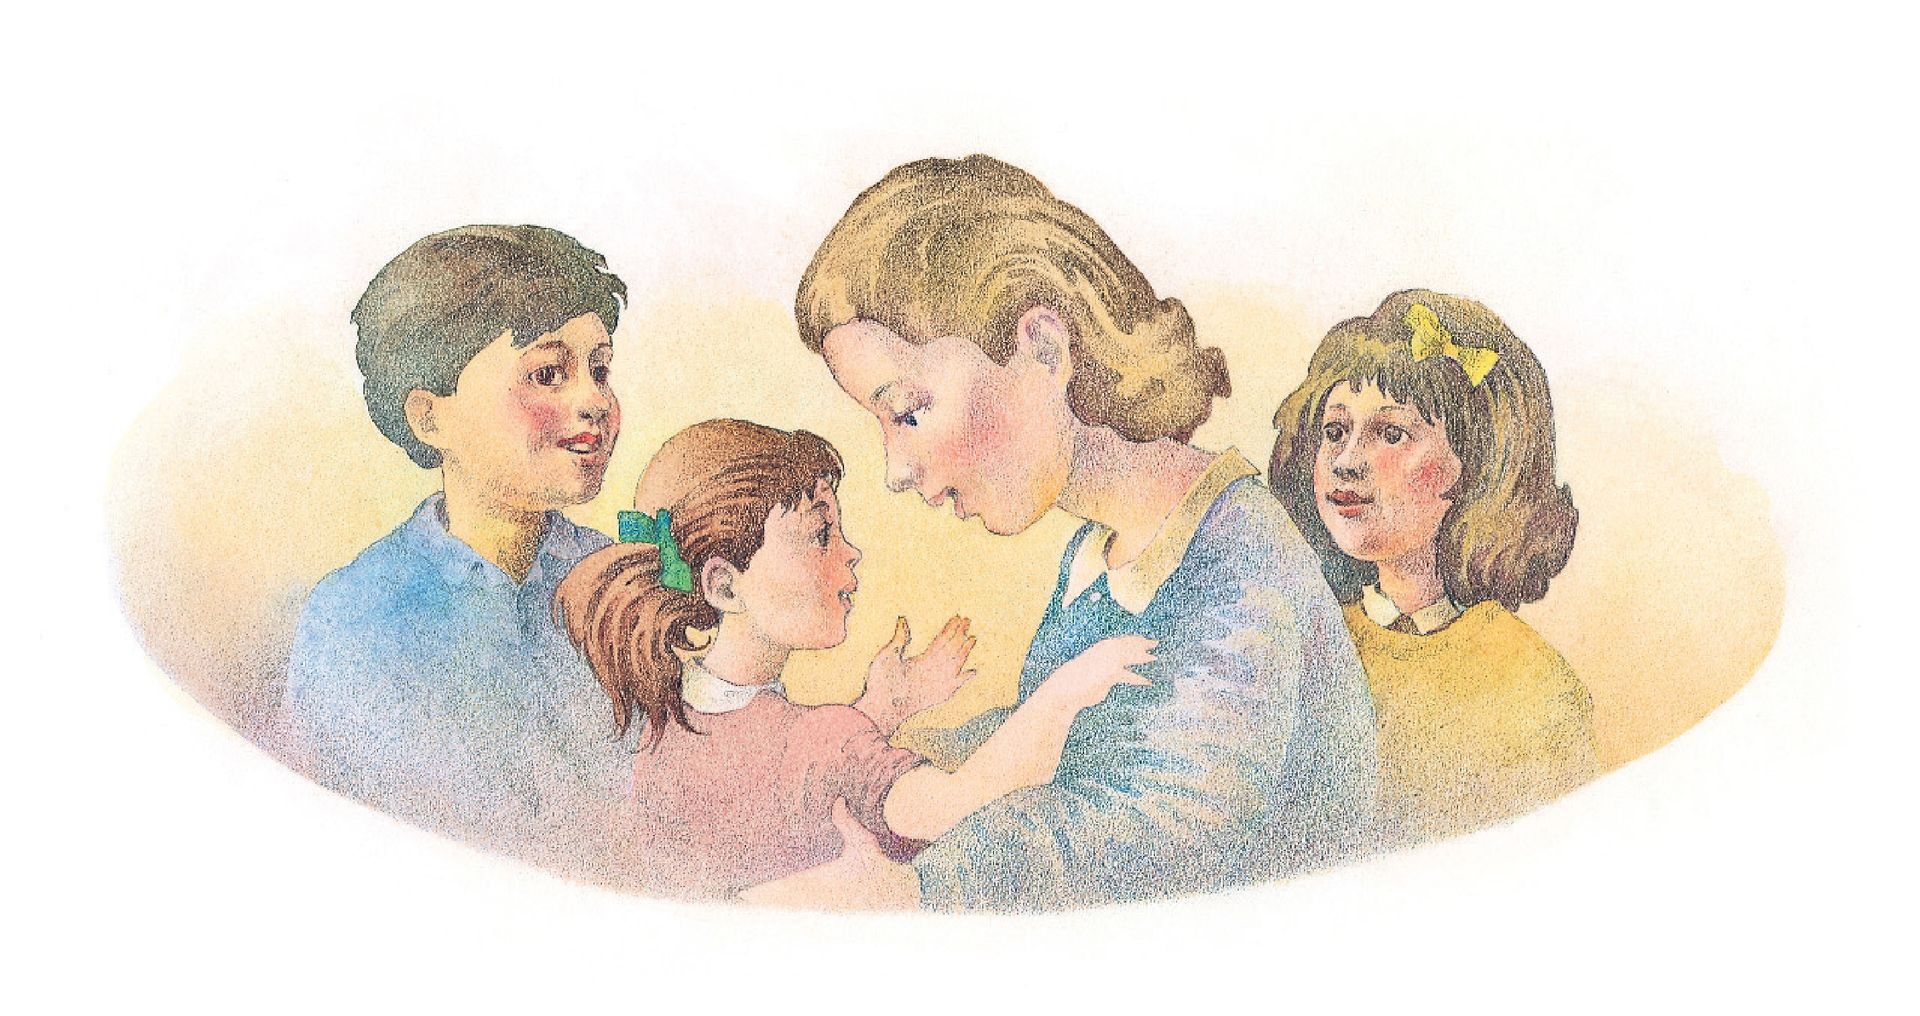 A mother interacting with her child while two other children stand nearby. From the Children’s Songbook, page 260, “Hello Song”; watercolor illustration by Richard Hull.